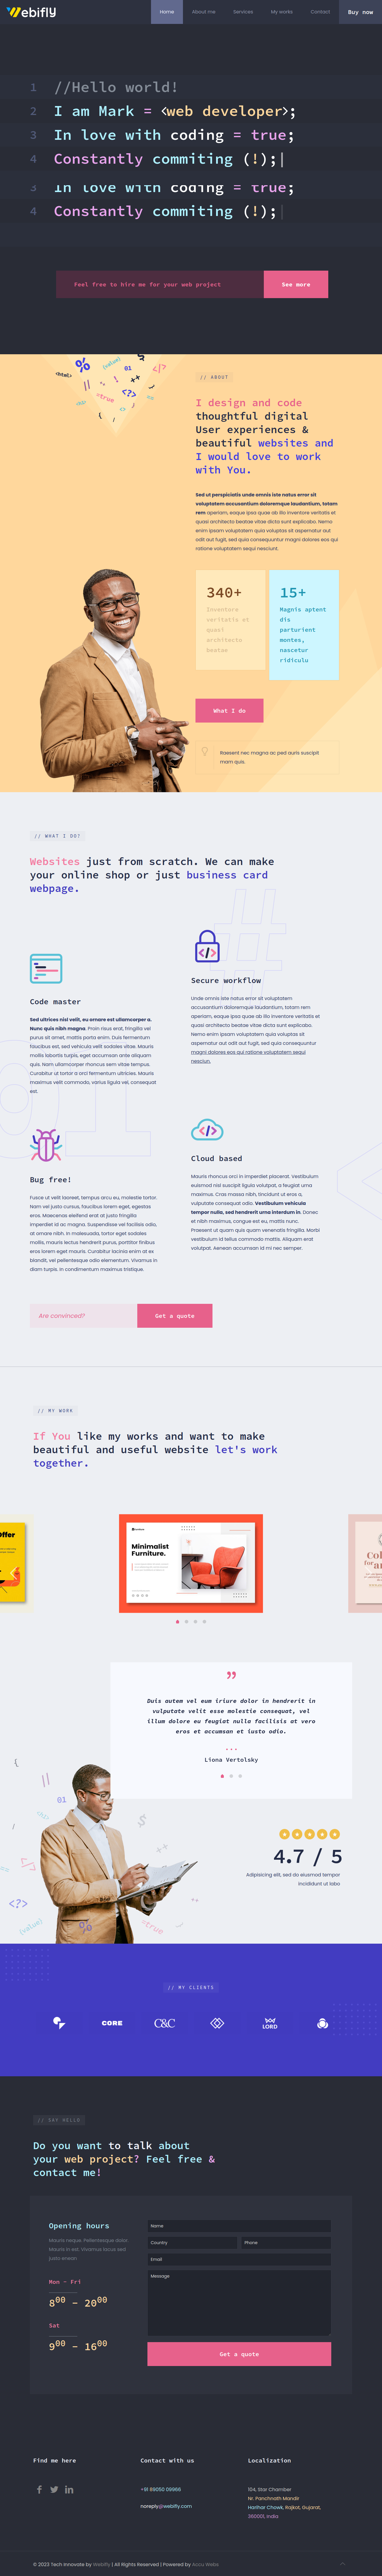 Web agency template for Tech and coding website